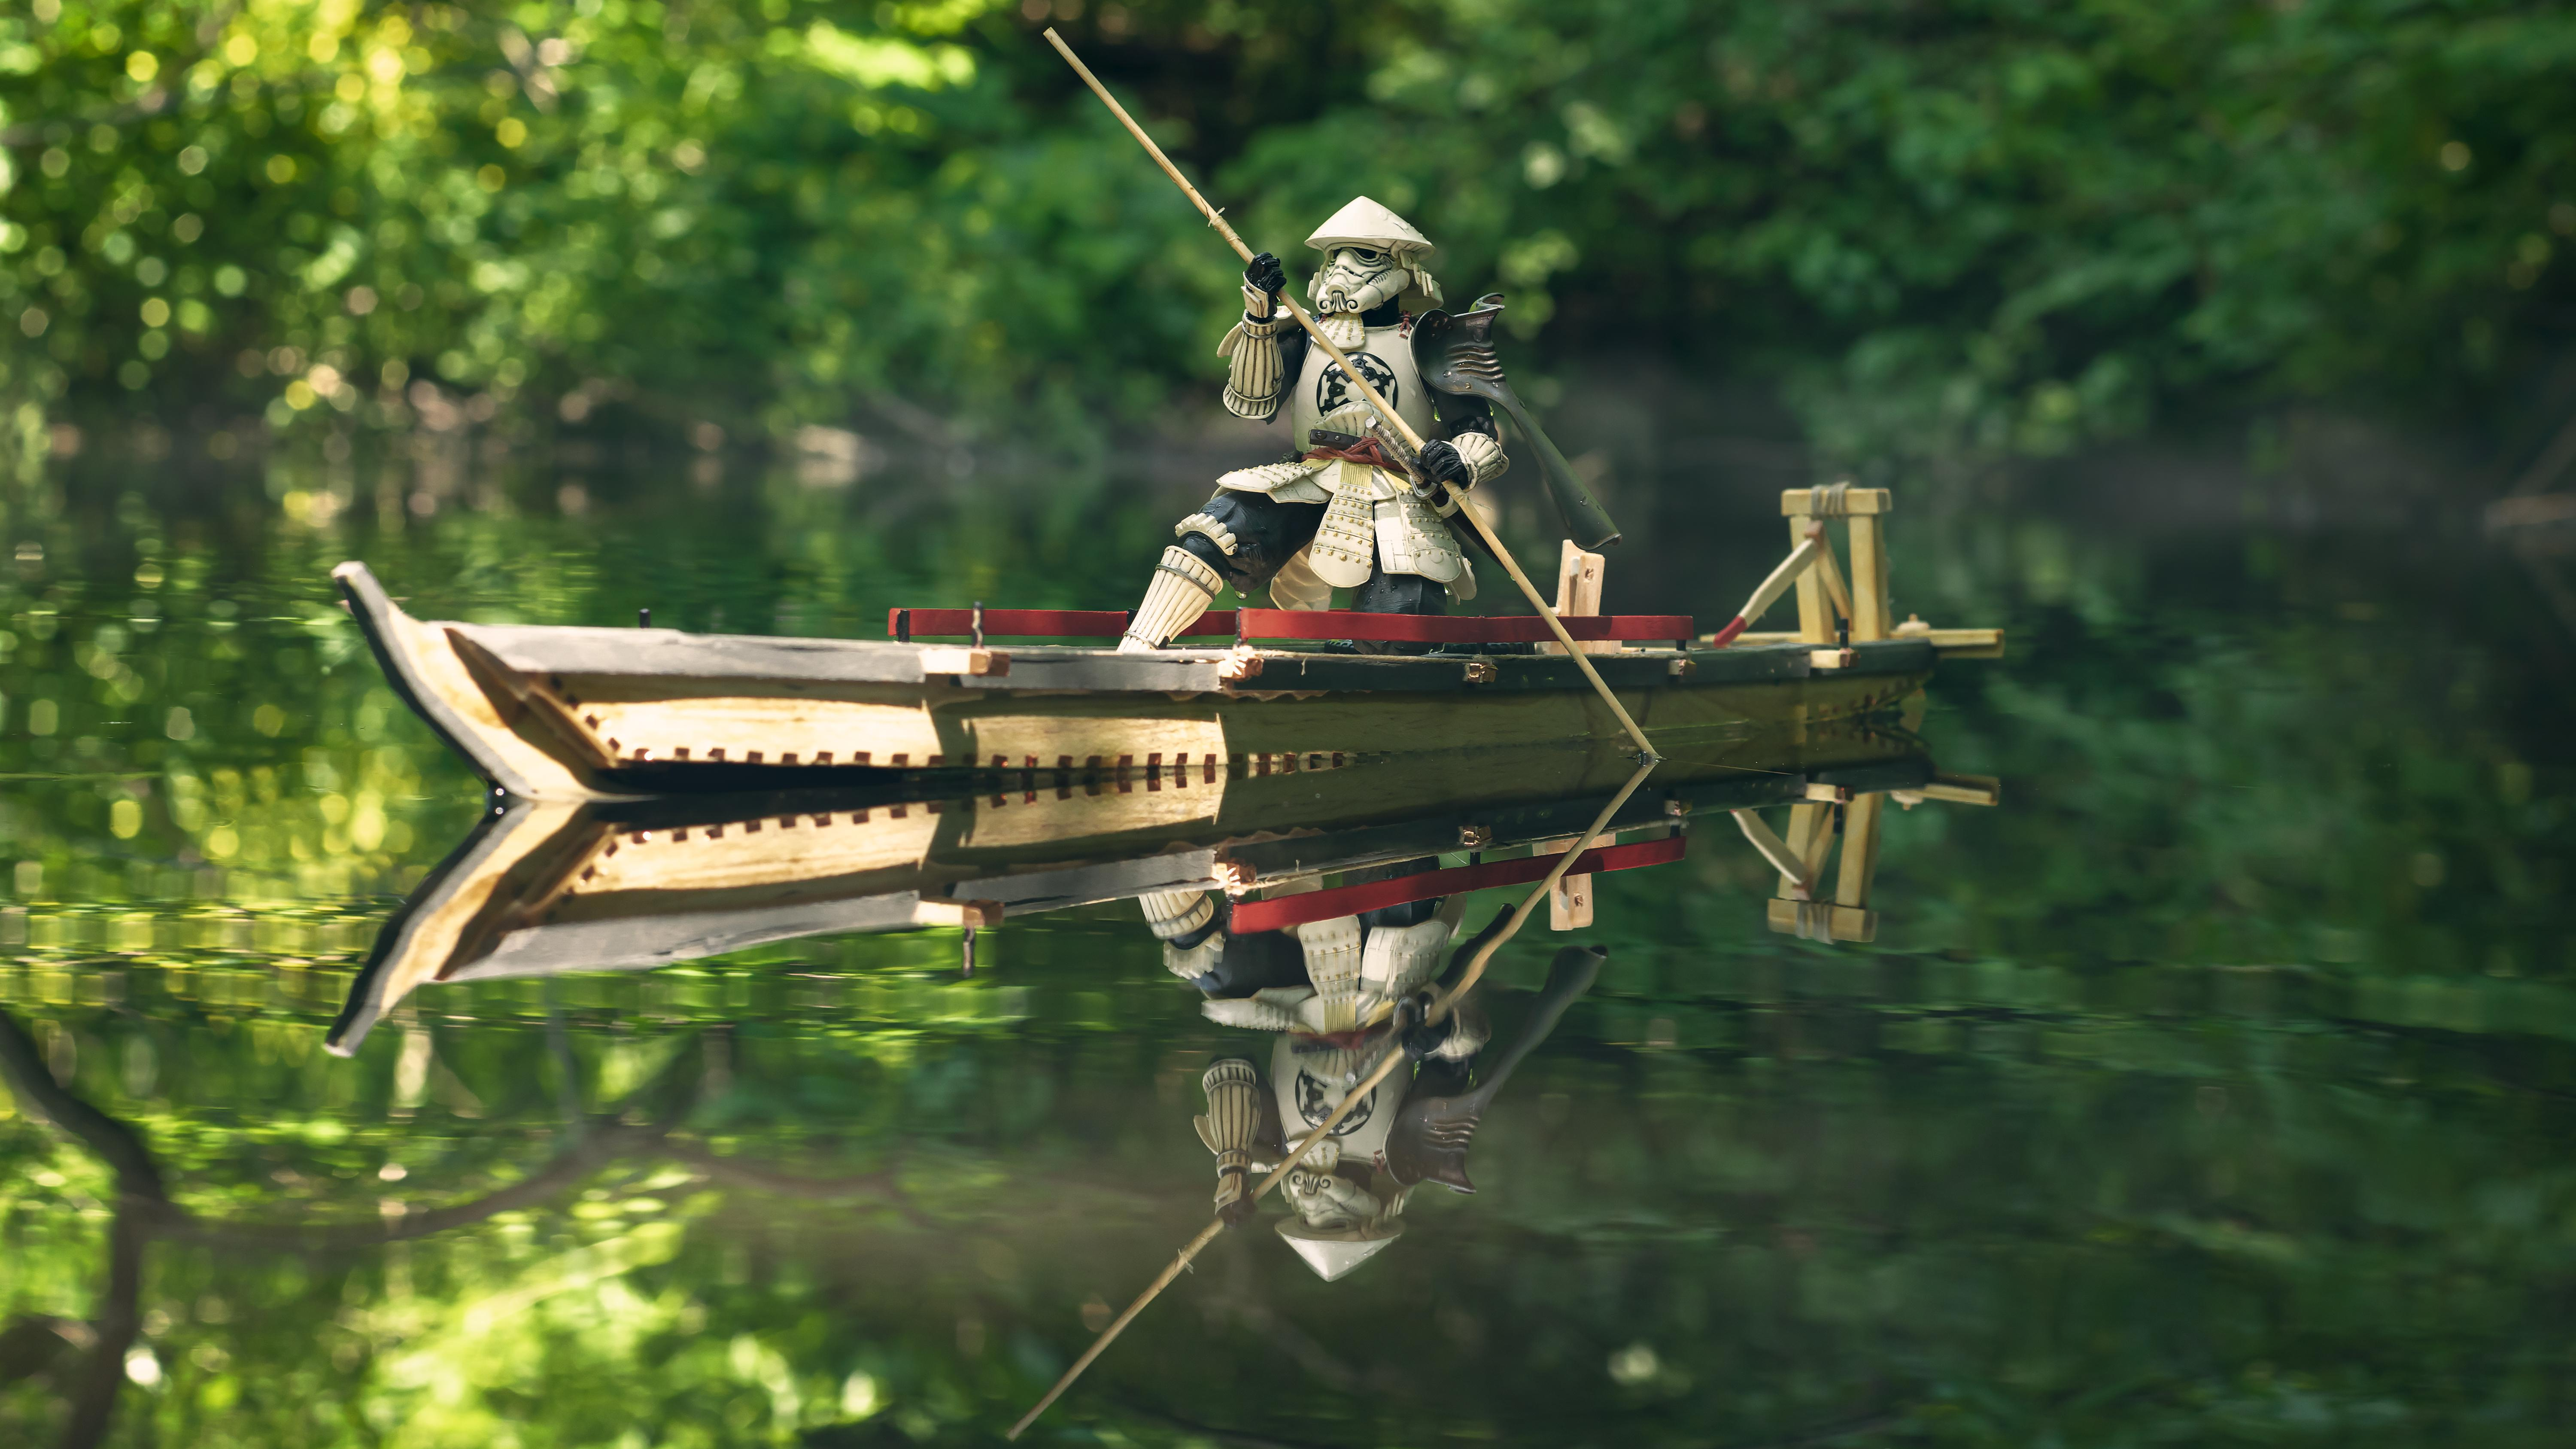 Stormtrooper Action Figures Boat Japan Toys 6000x3374